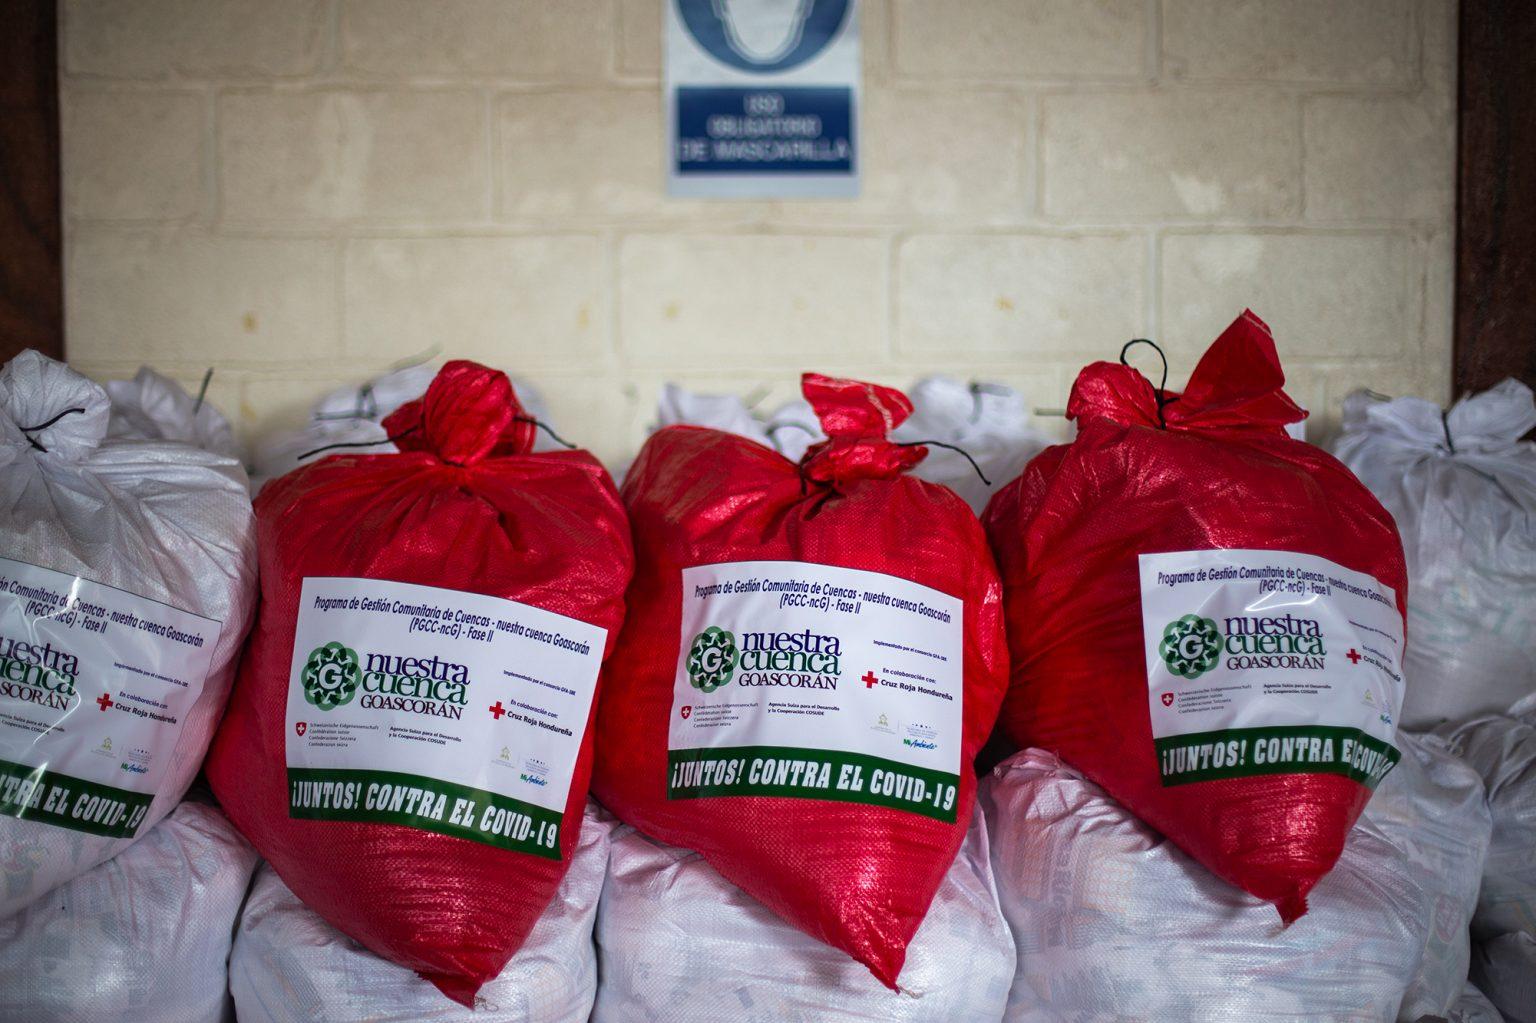 Sacks of food to be delivered by the Red Cross. Nacaome, Valle, August 29 2020. Photo: Martín Cálix